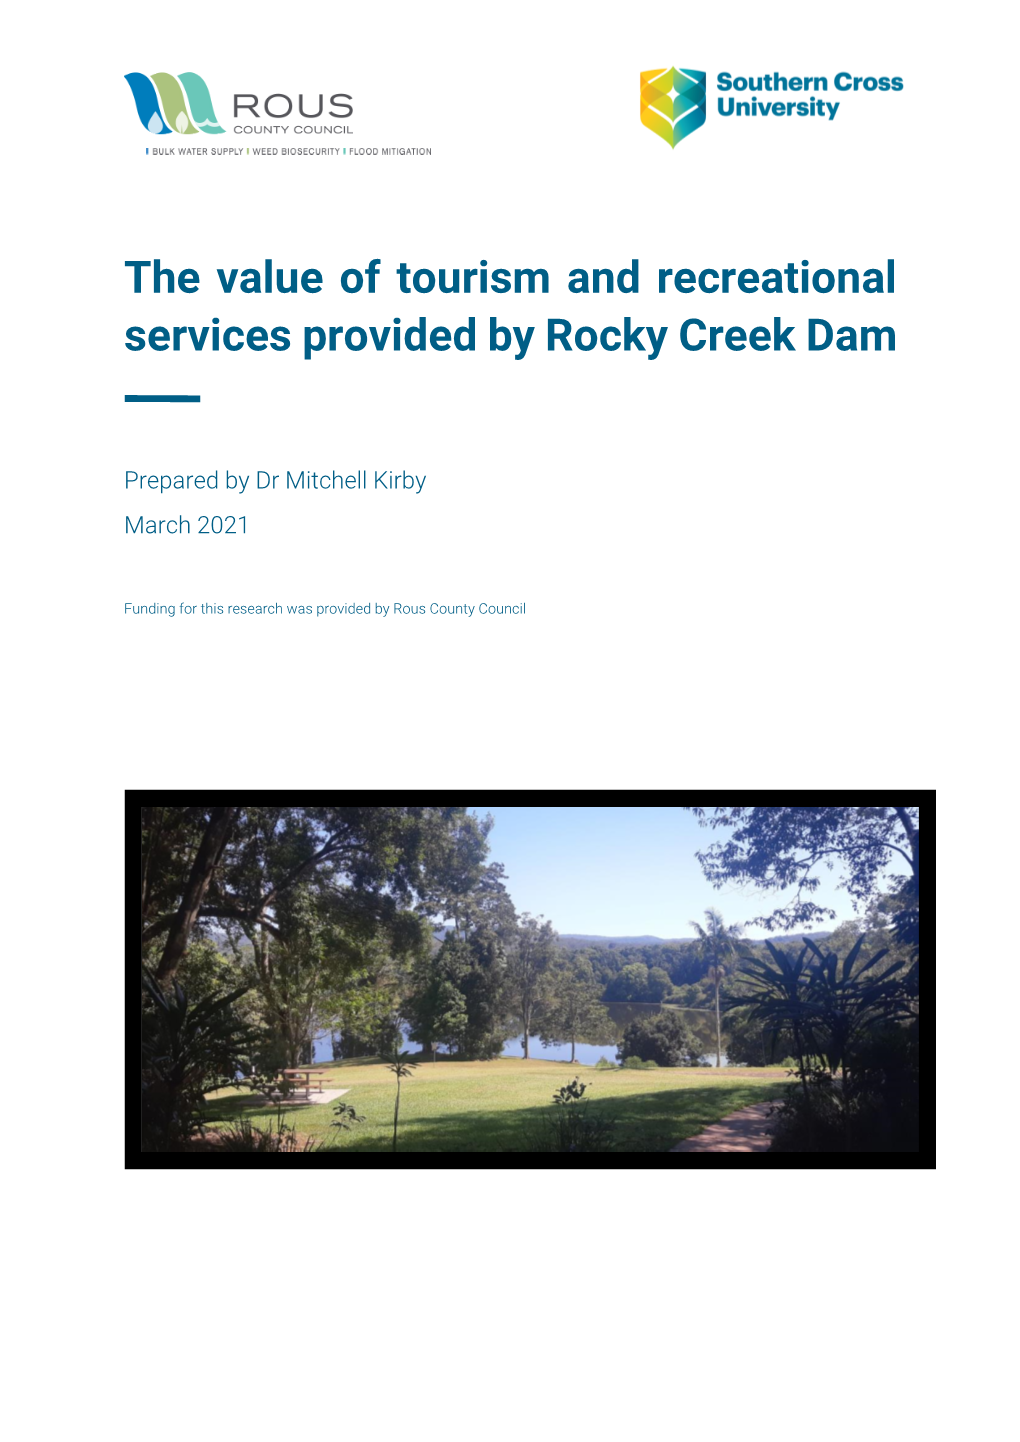 Rocky Creek Dam Non Market Value Study of Tourism and Recreational